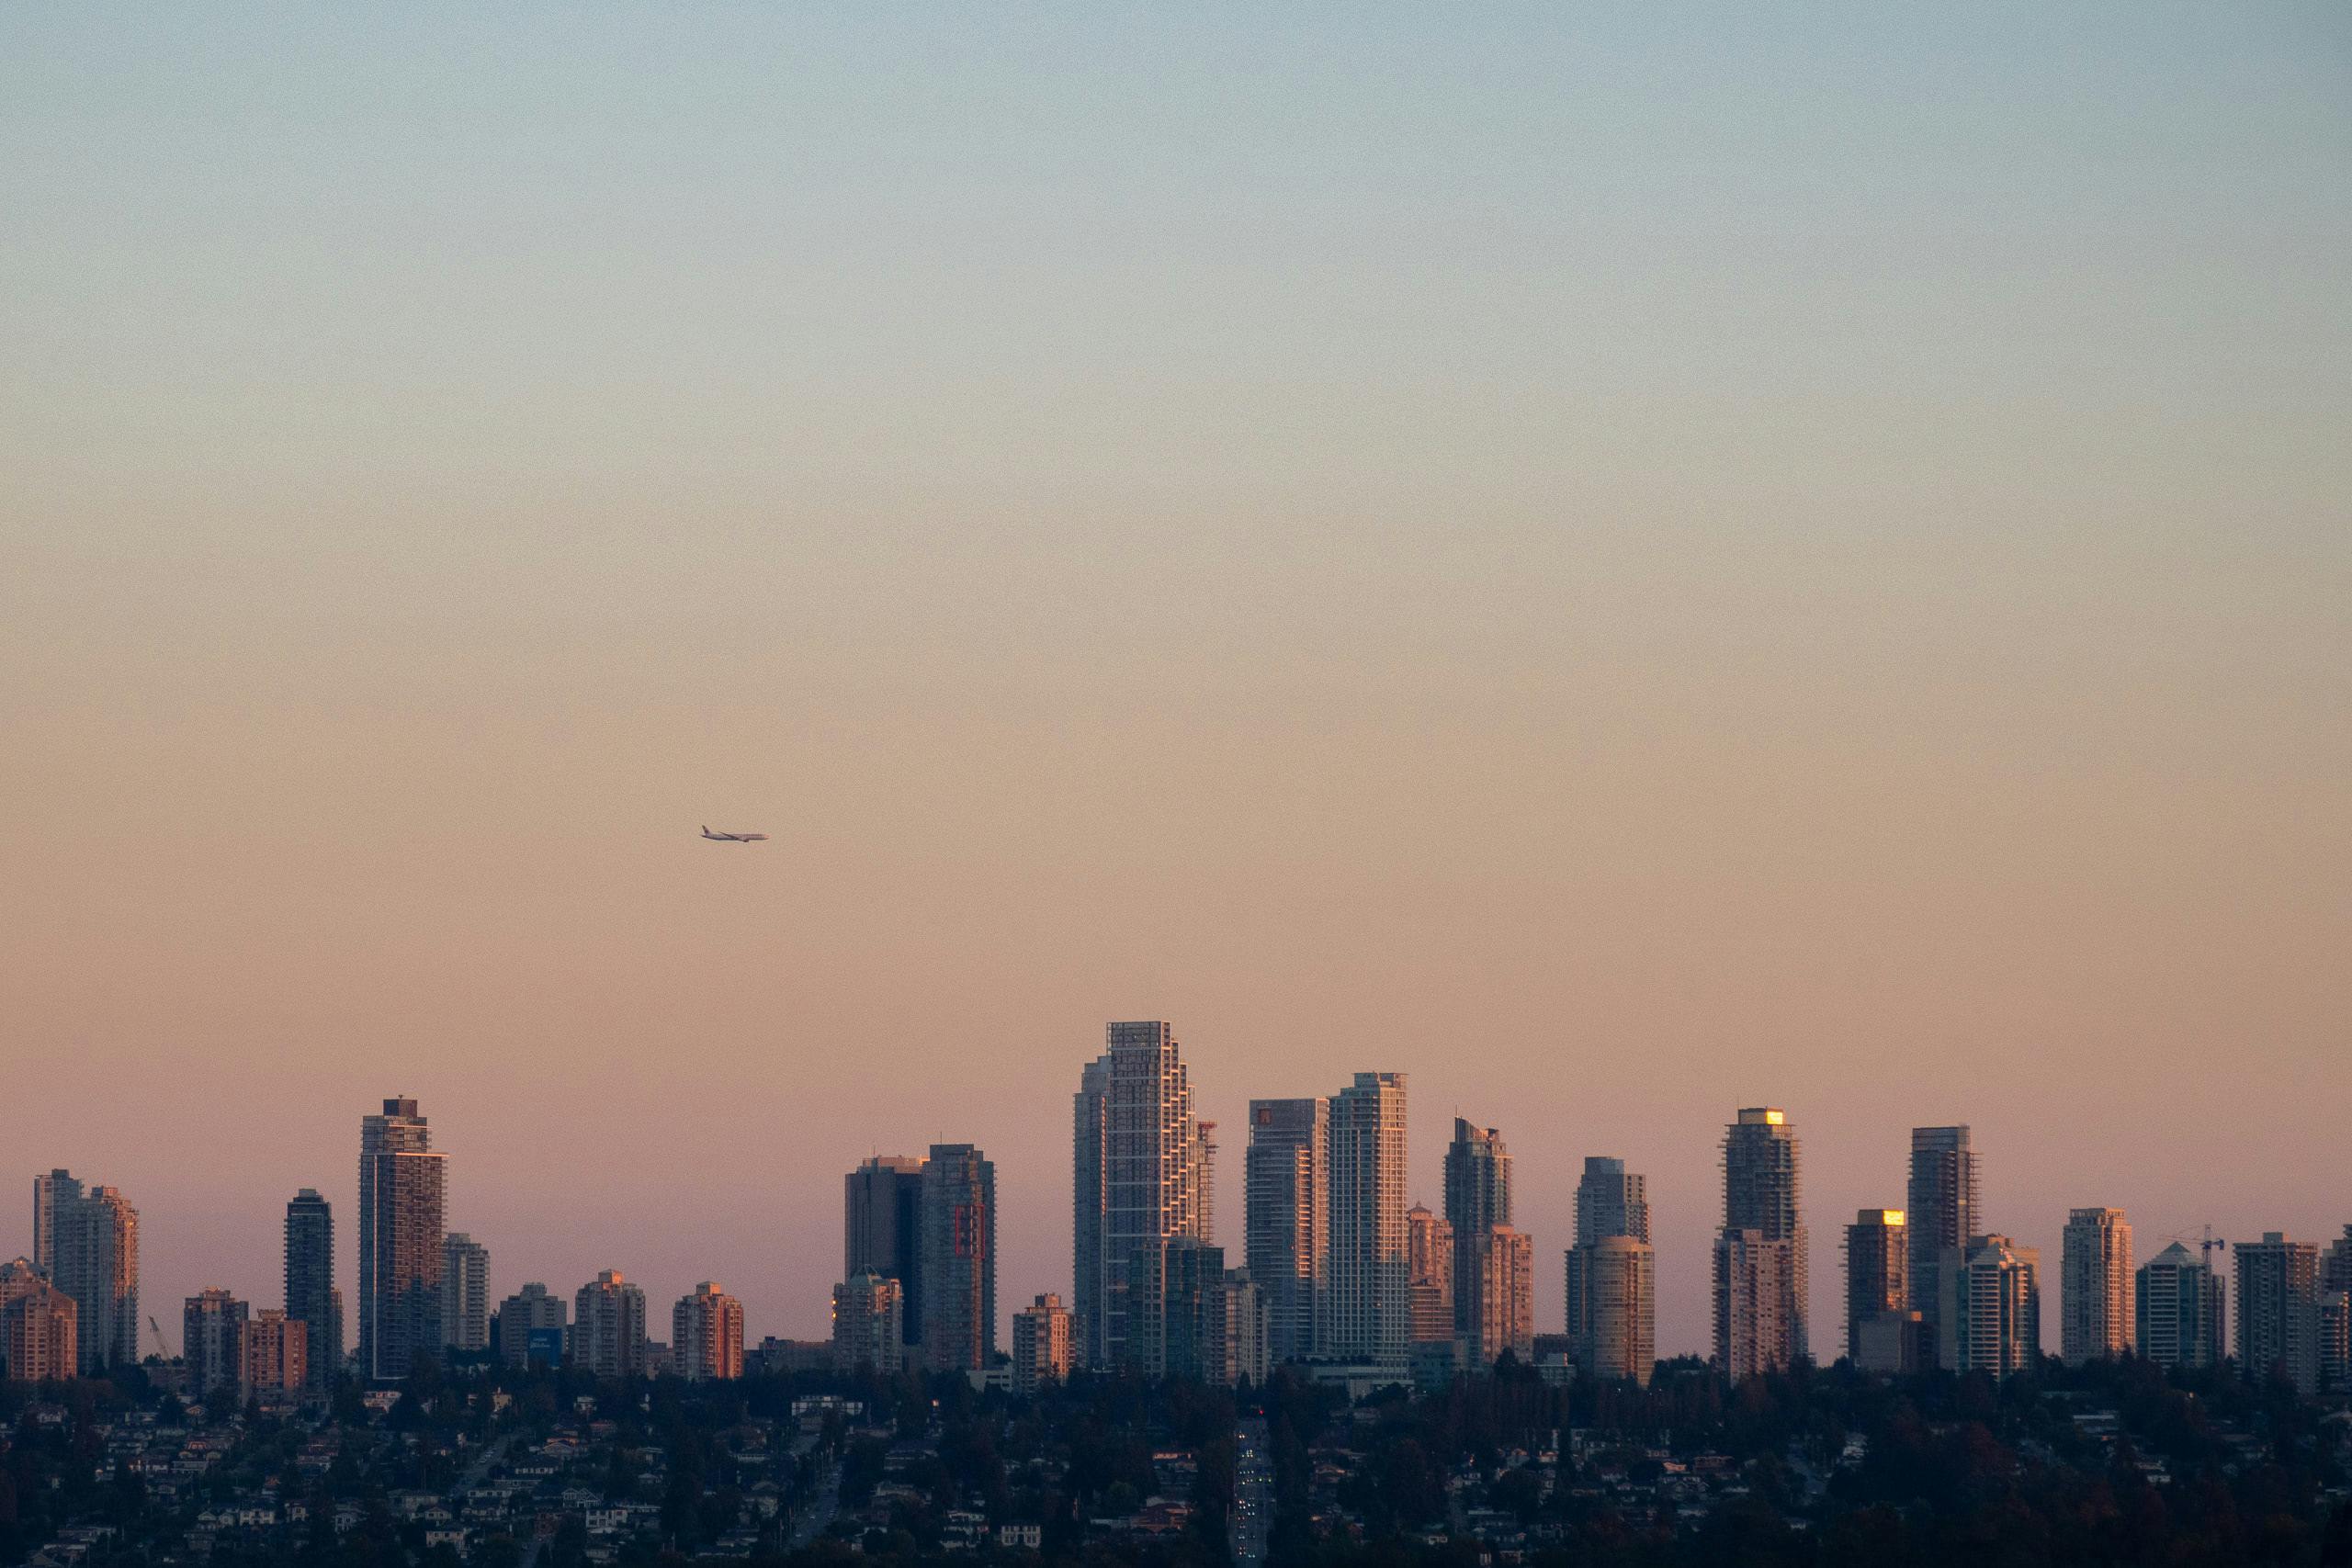 A plane at the left-center flying over a city skyline during sunset